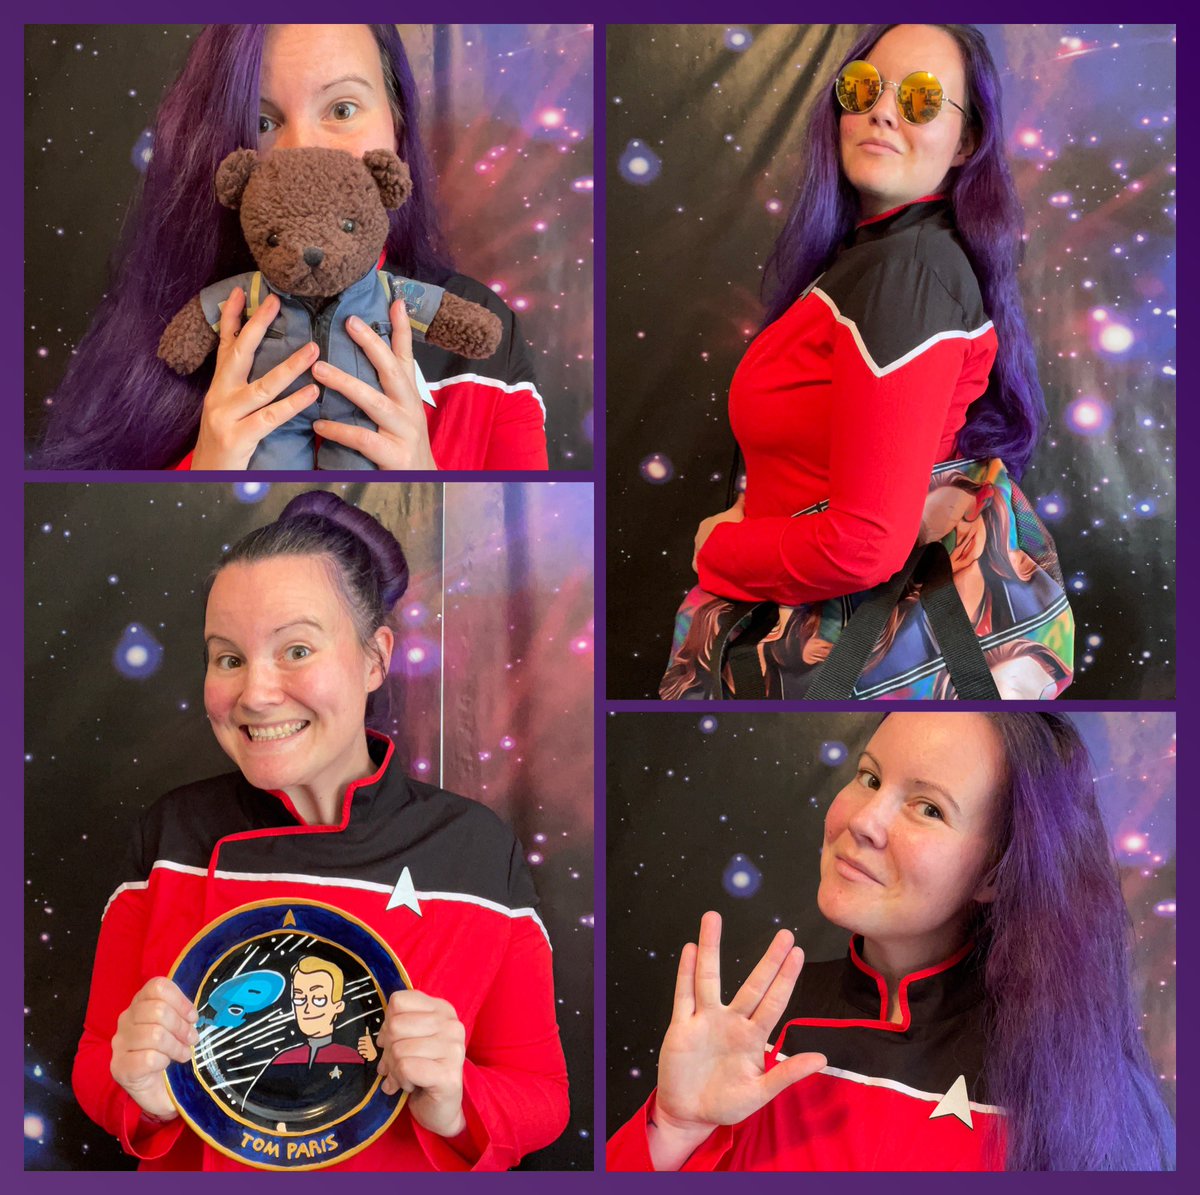 New hair color, so I totally had to do a thing… and yes, I made my own Tom Paris plate just to take this picture! 😅 Happy #TrekTuesday! #BoimMeUp! 🖖